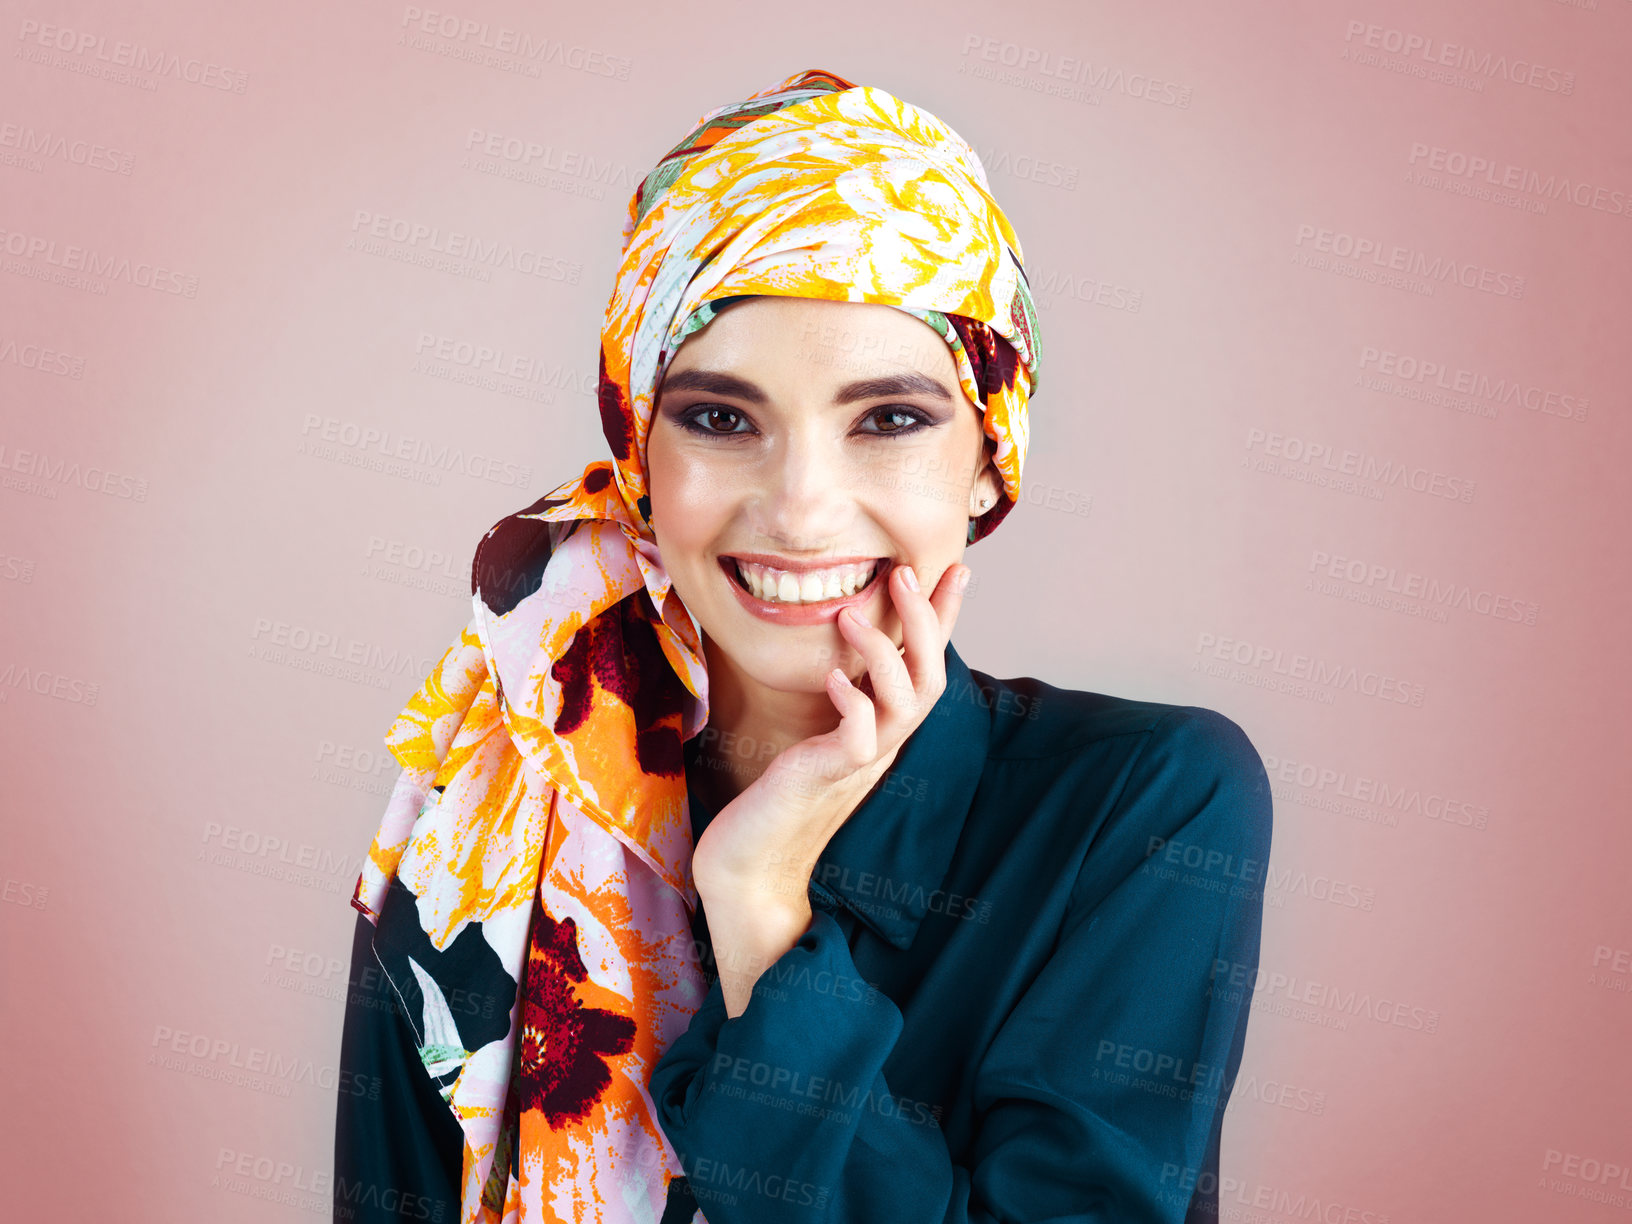 Buy stock photo Studio portrait of a cheerful young woman wearing a colorful head scarf while posing against a pink background